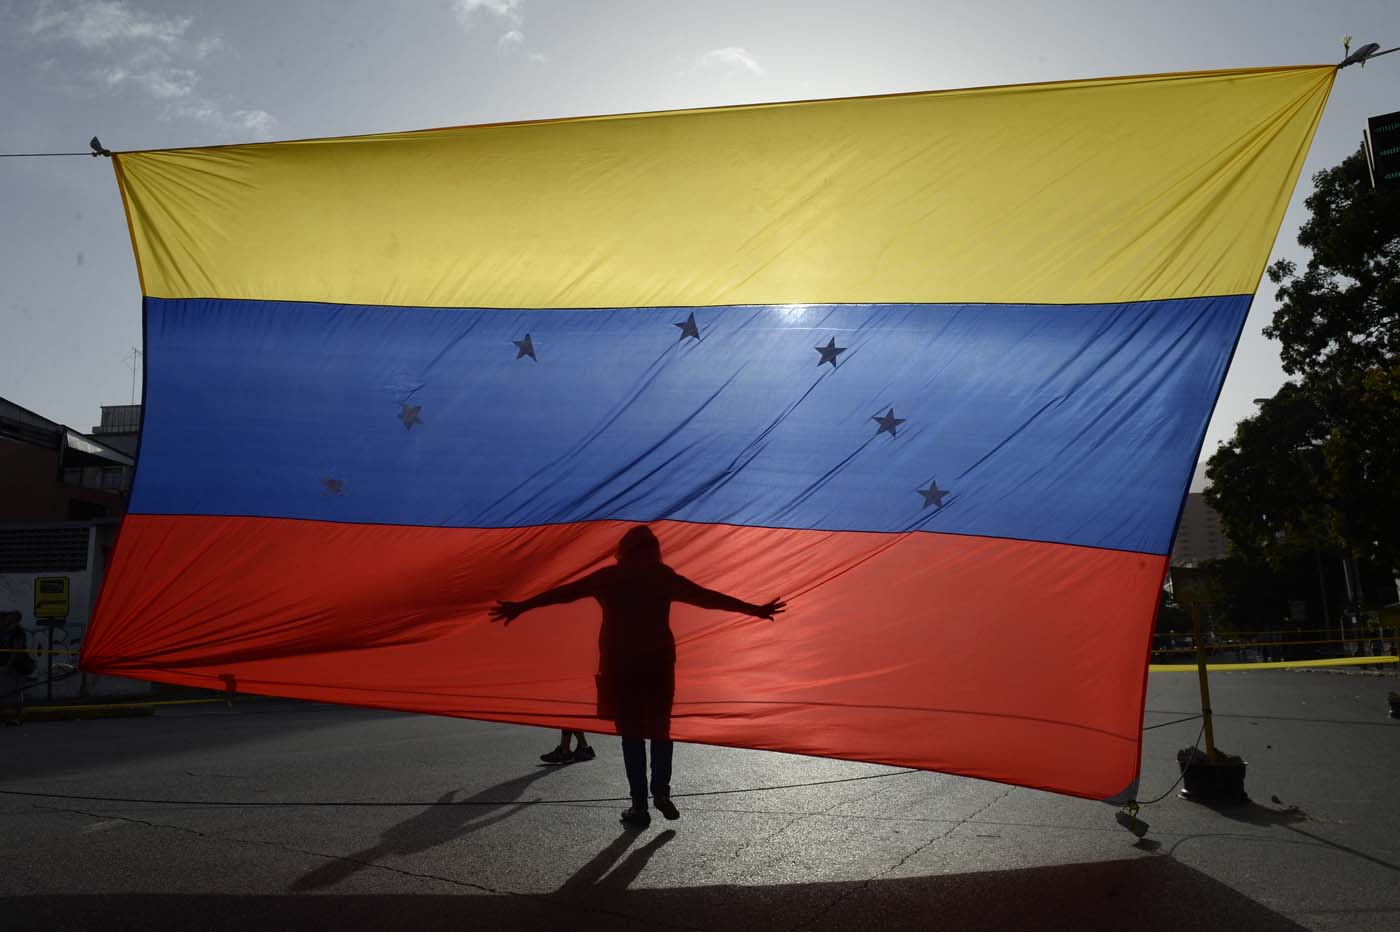 A person's shadow is cast on a Venezuelan national flag in Caracas on July 10, 2017. Venezuela hit its 100th day of anti-government protests Sunday, amid uncertainty over whether the release from prison a day earlier of prominent political prisoner Leopoldo Lopez might open the way to negotiations to defuse the profound crisis gripping the country. / AFP PHOTO / FEDERICO PARRA